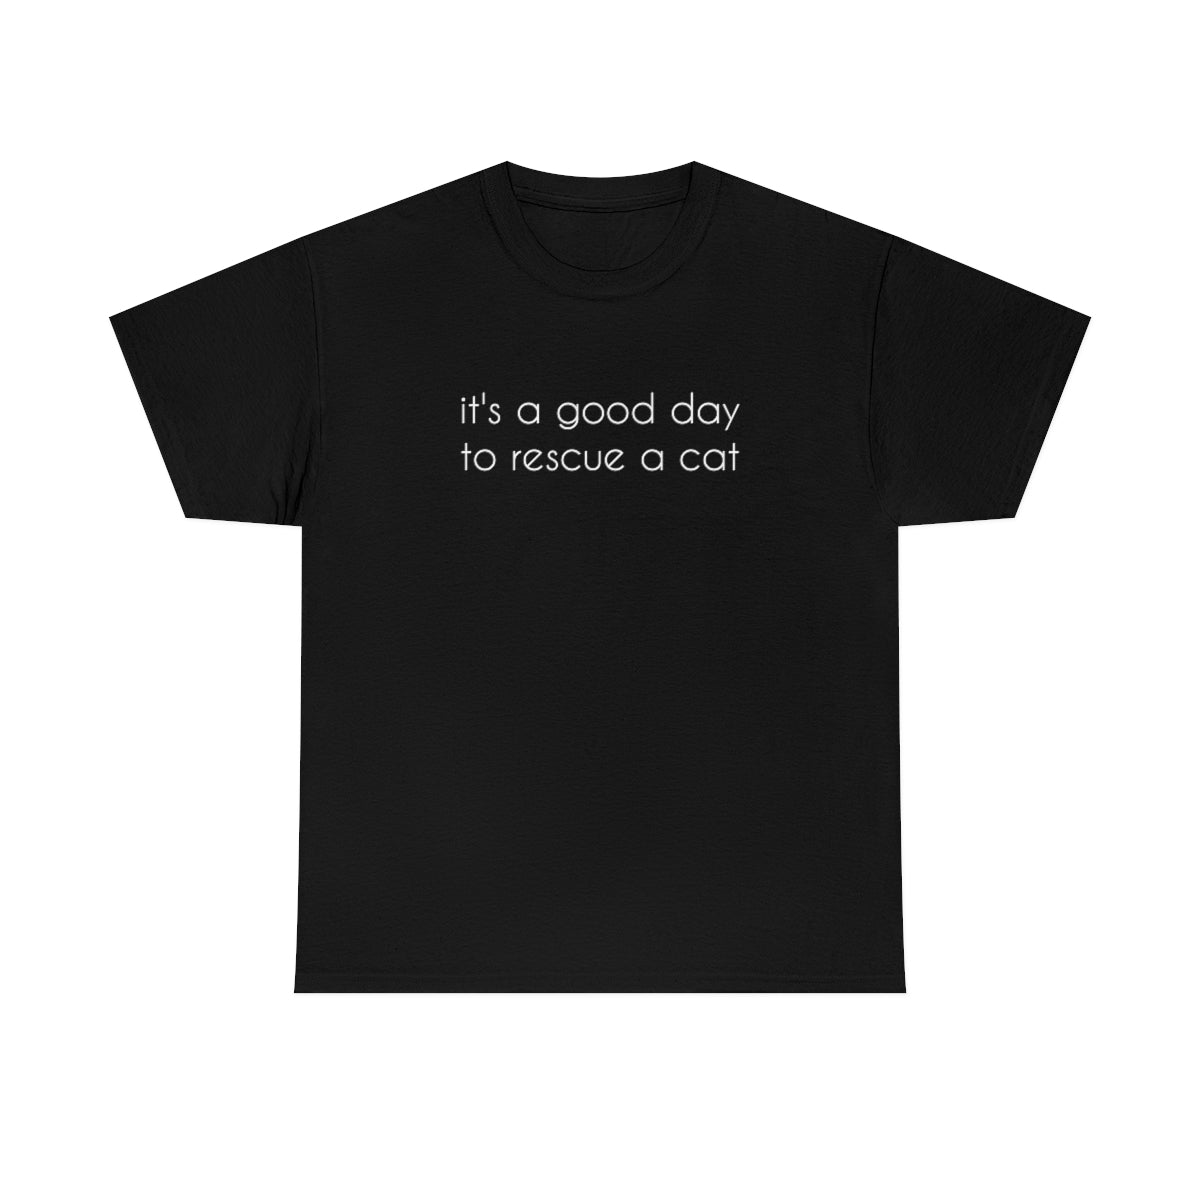 It's A Good Day To Rescue A Cat | Text Tees - Detezi Designs-73361252109856637409